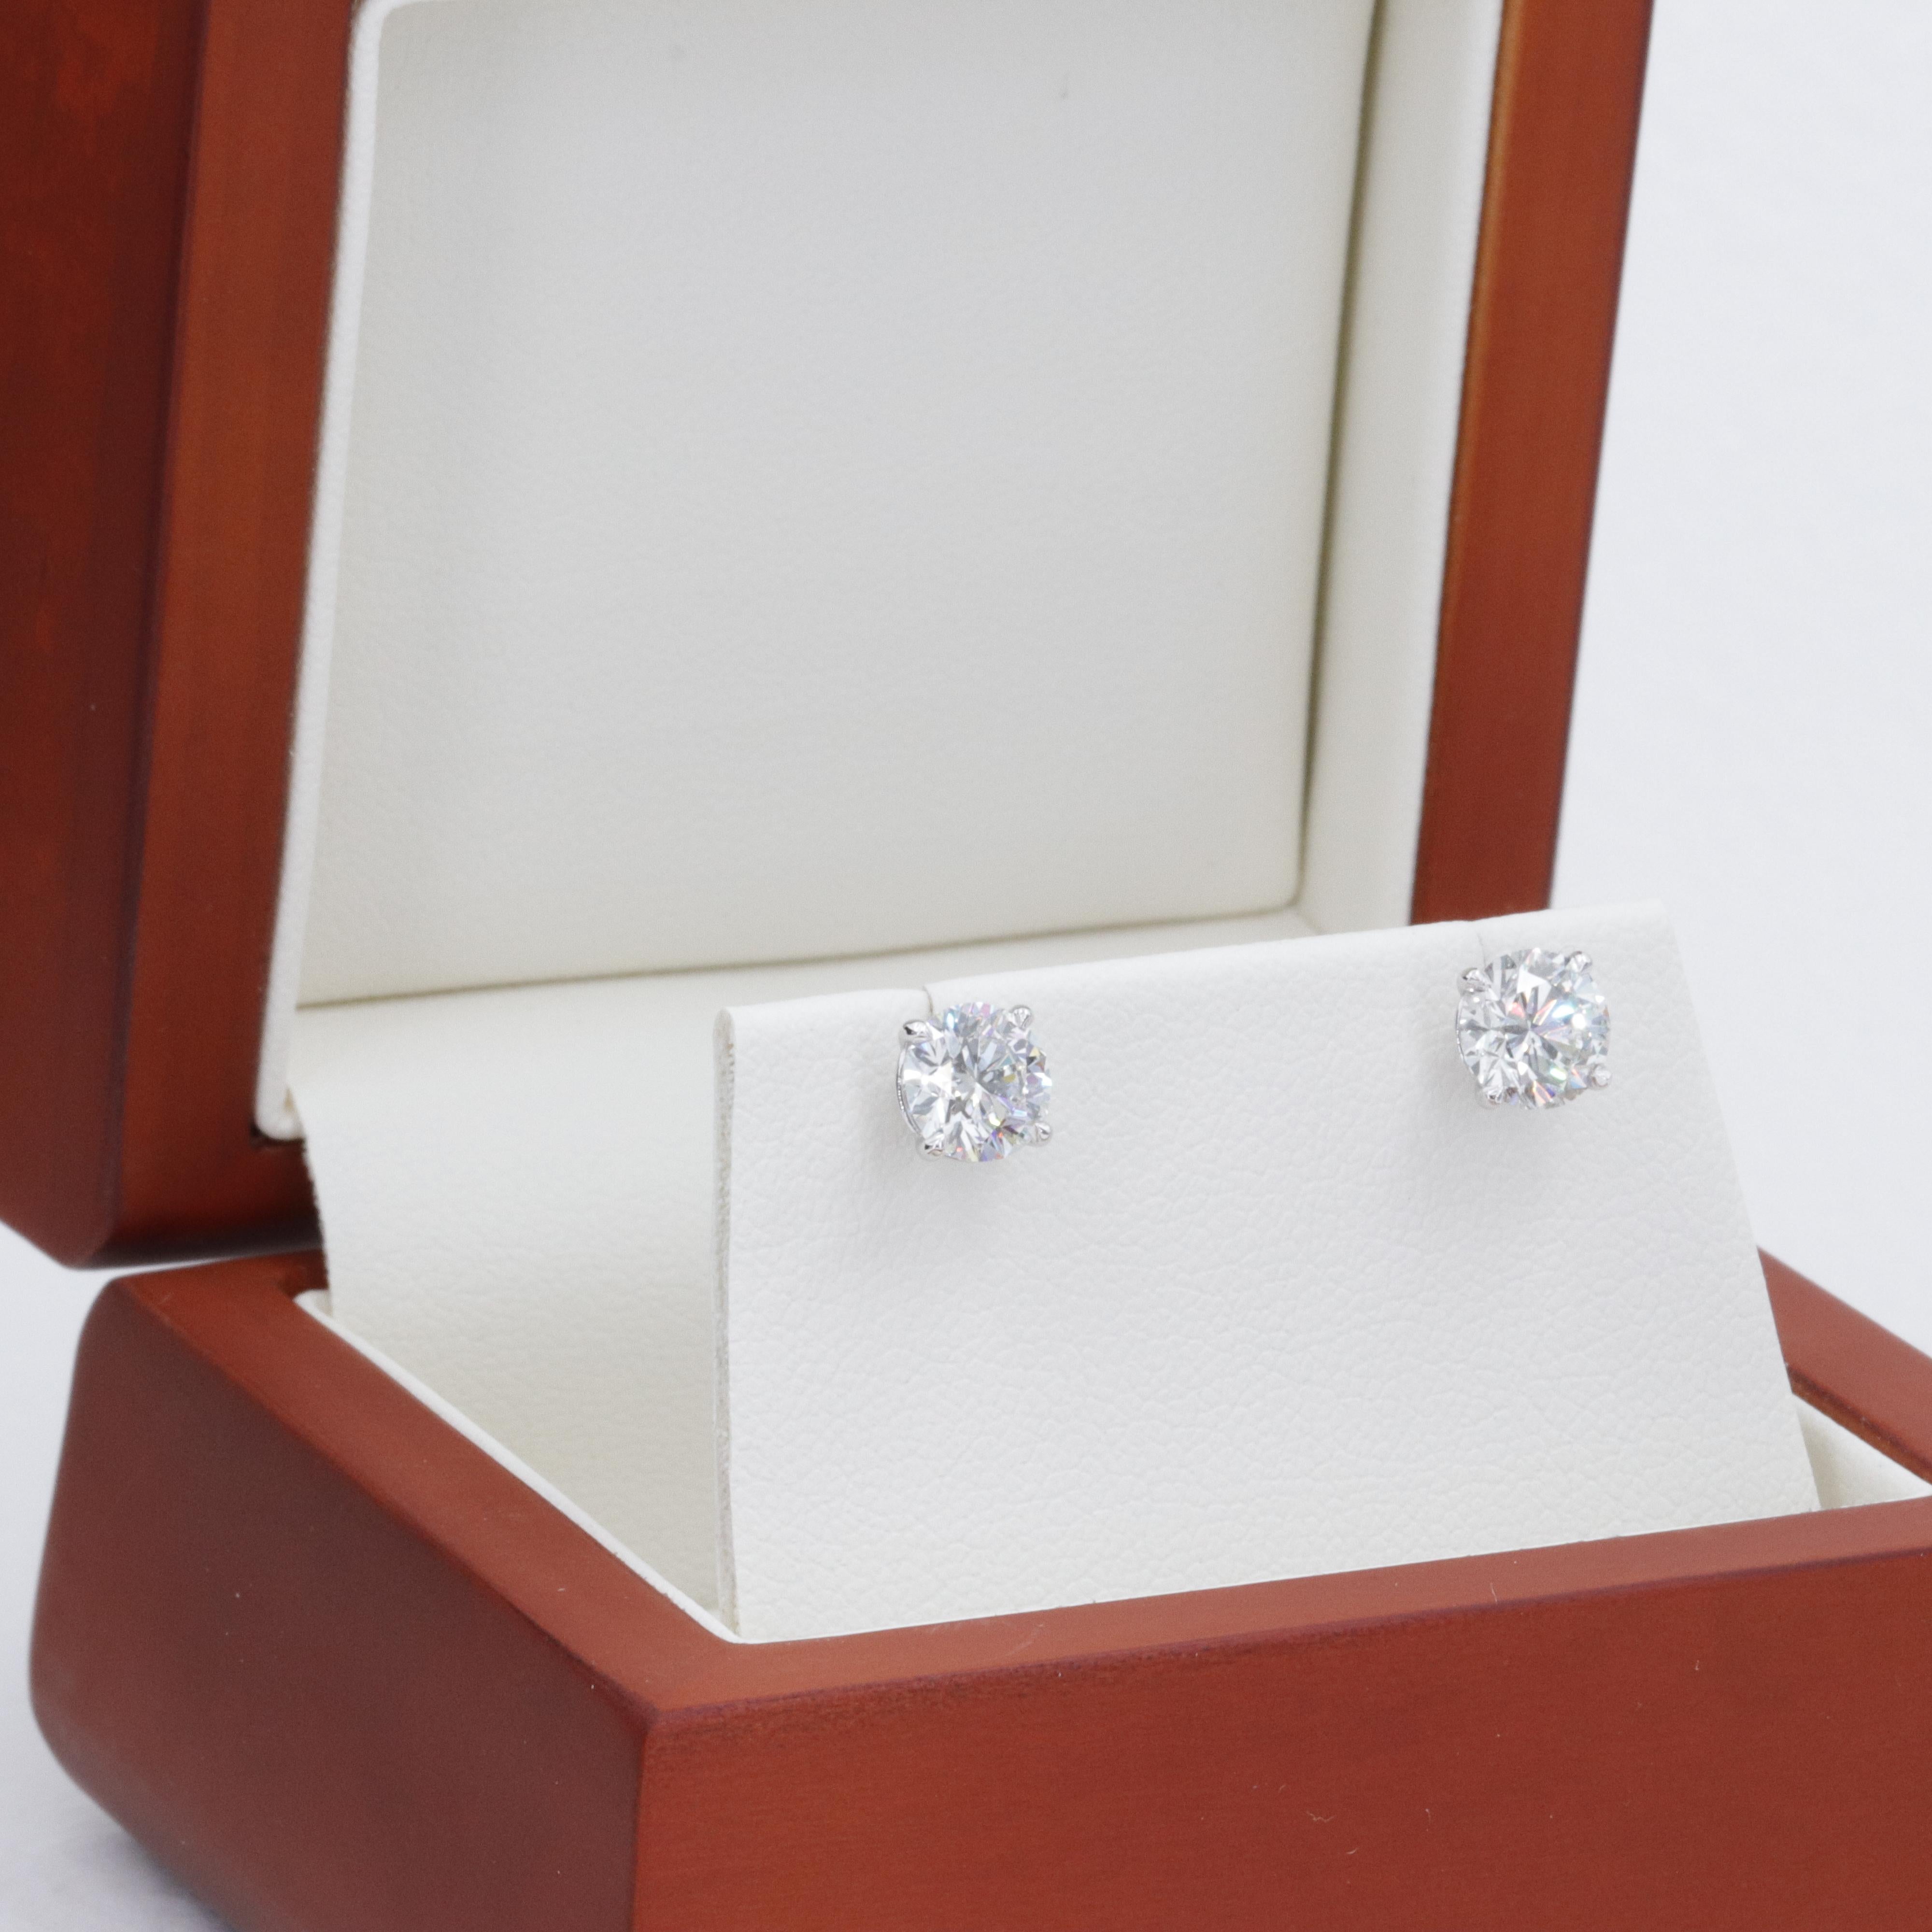 A beautiful pair of well matched round brilliant cut natural diamonds weighing 2.06 carats, with accompanying reports from the Gemological Institute of America (GIA) grading the diamonds as a bright white H & I in color with eye clean SI1 & SI2